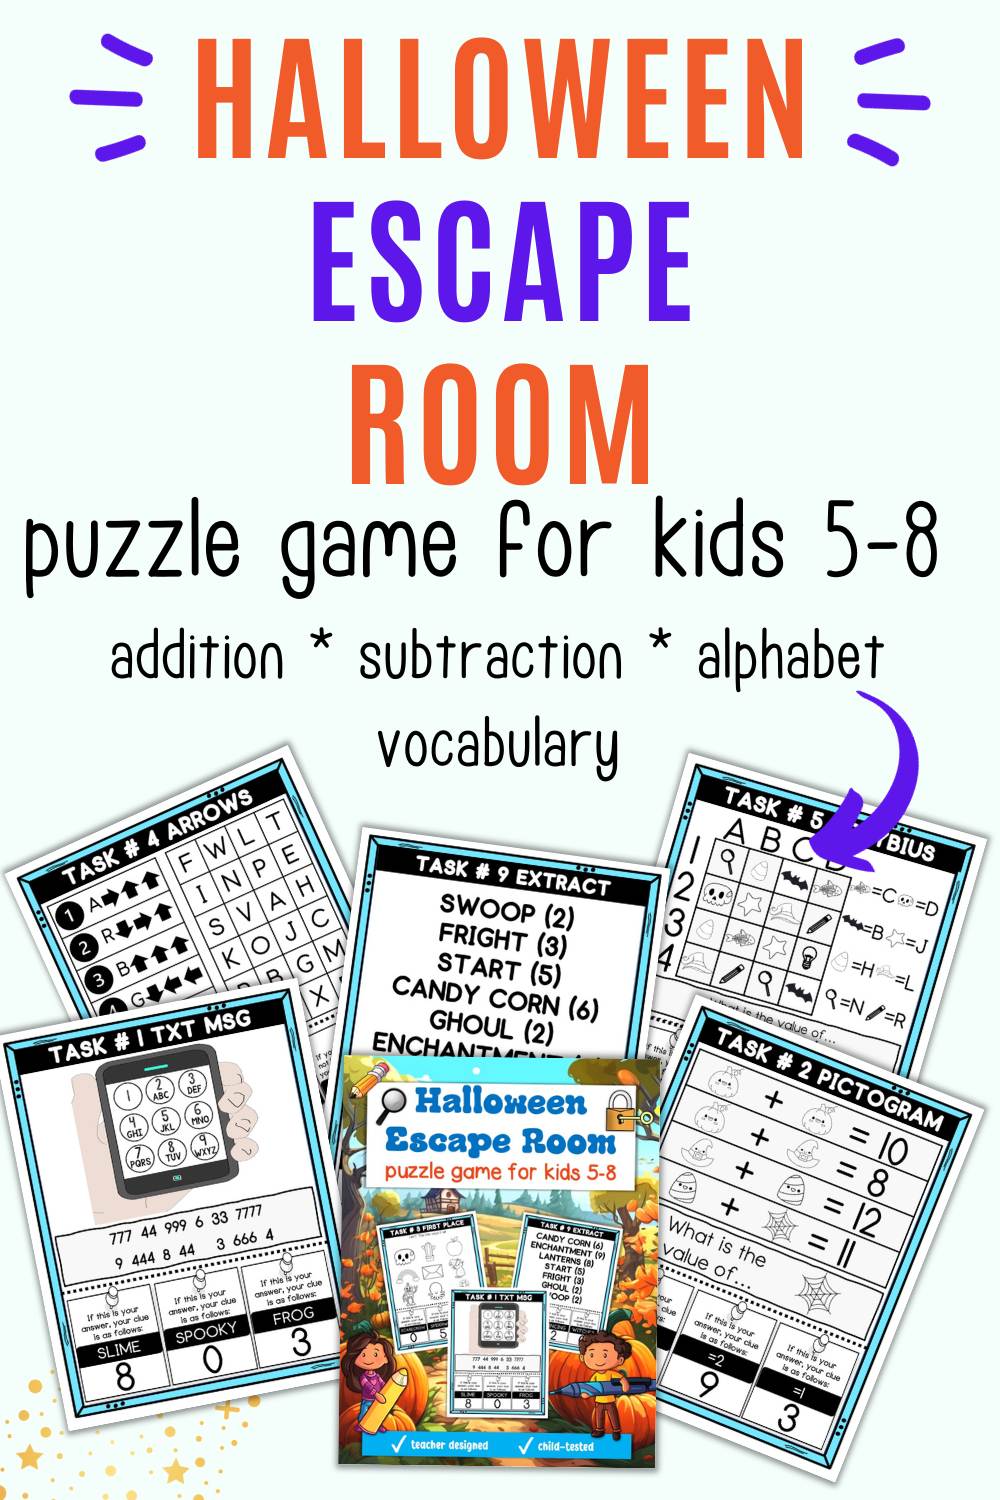  Escape Games and other Puzzle Games